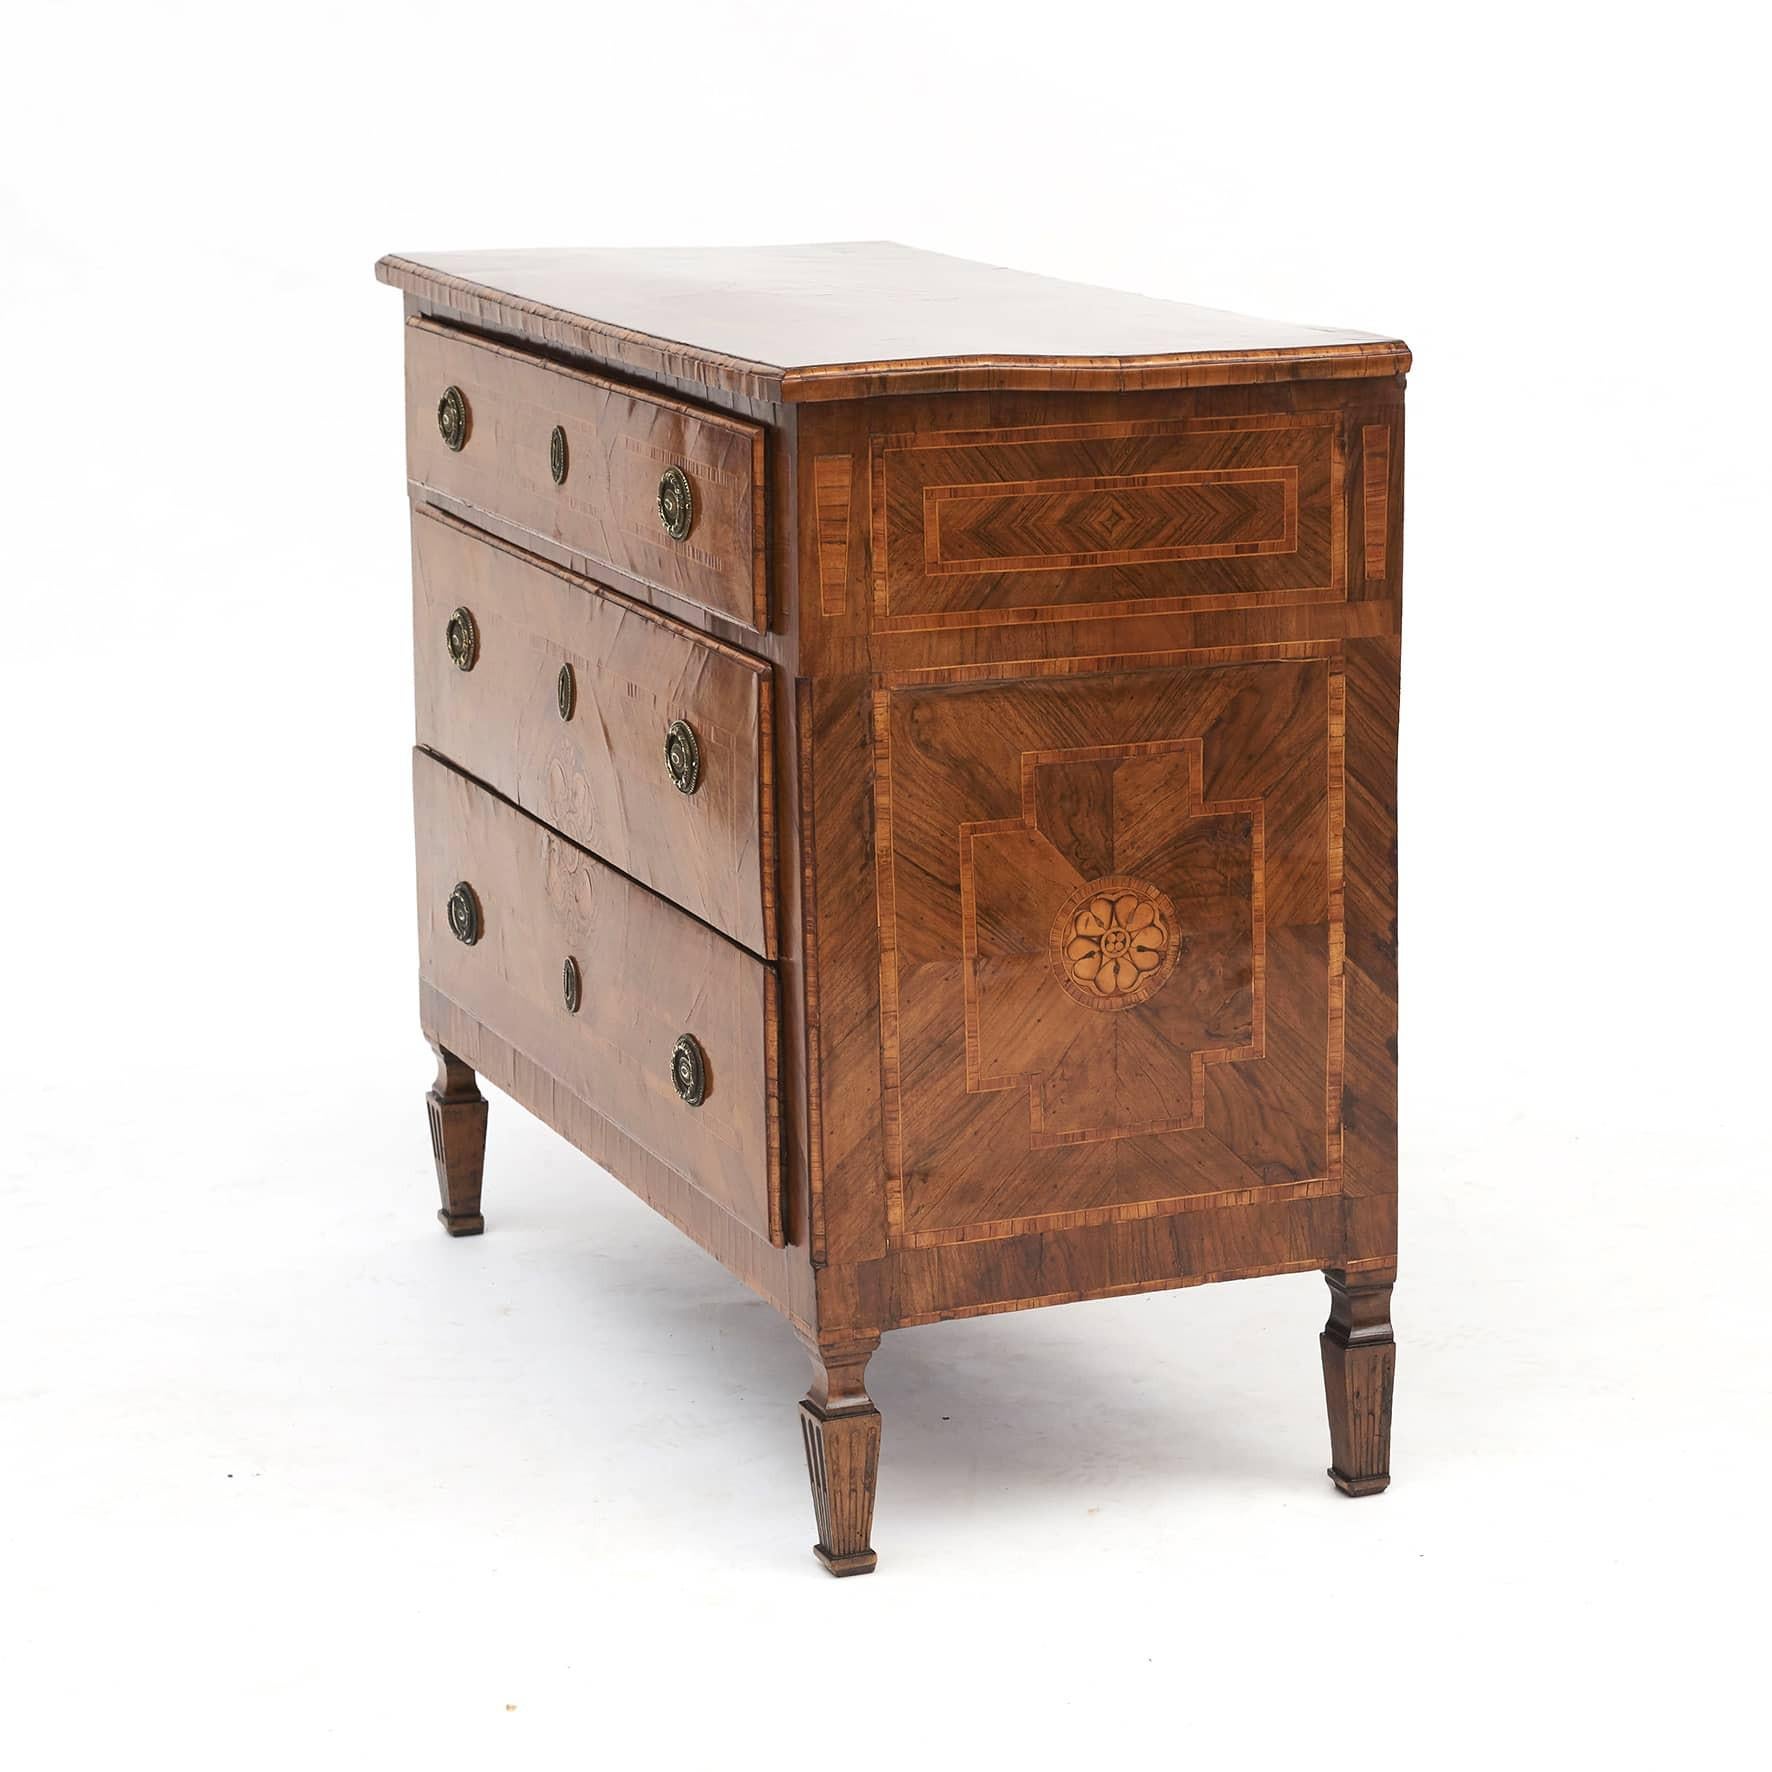 Italian Louis XVI chest of drawers from Lombardy, 1780-1790.

Three drawers. Original thick mirror-cut walnut veneer with marquetry work on top, sides and and front with stylized foliage in lemon and rosewood. Front, top and sides further with